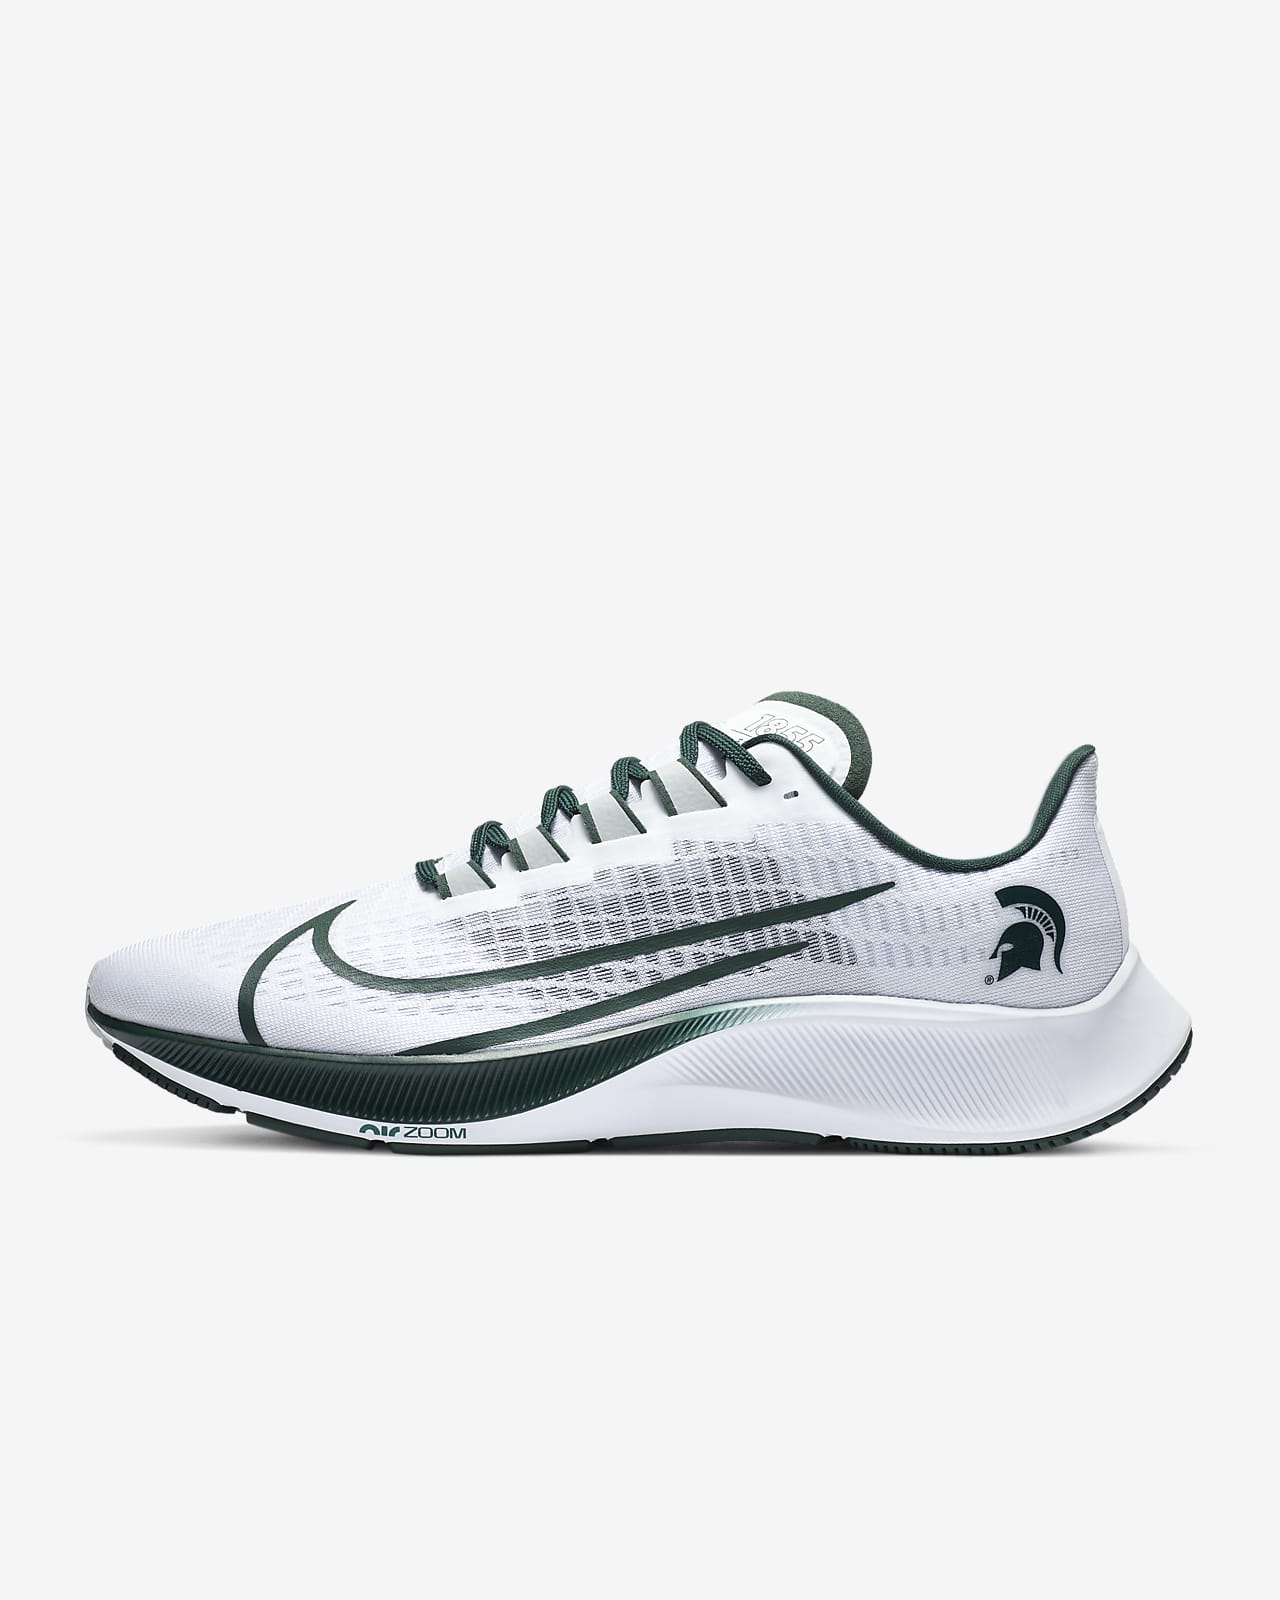 nike college football shoes